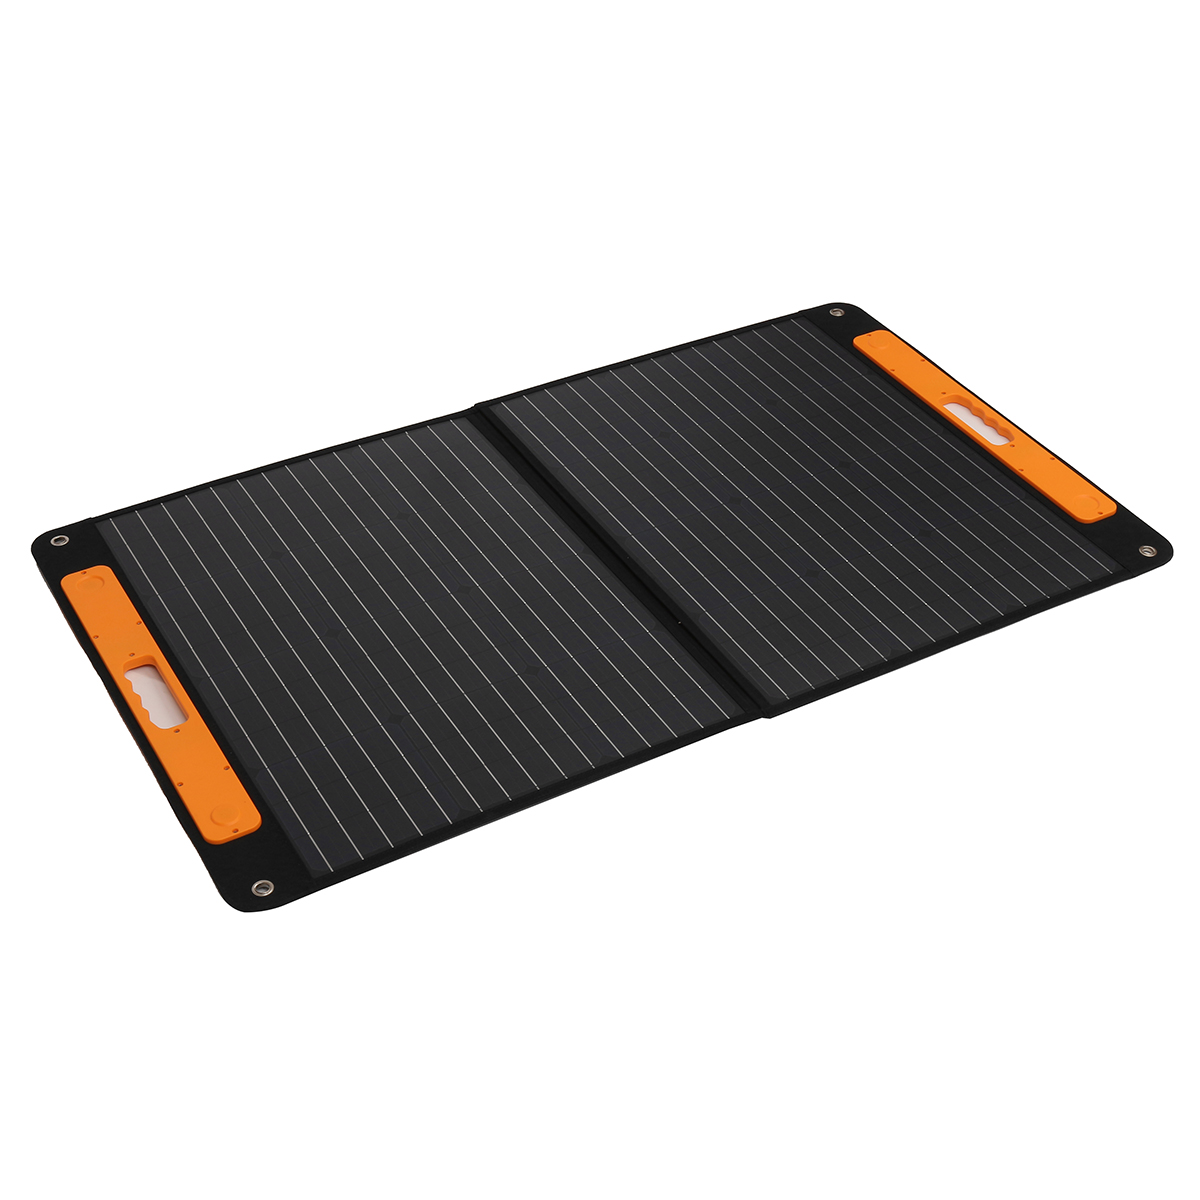 120W-Foldable-Solar-Panel-USB-Protable-Outdoor-Folding-Solar-Cells-Solar-Power-Battery-Charger-for-P-1935461-3